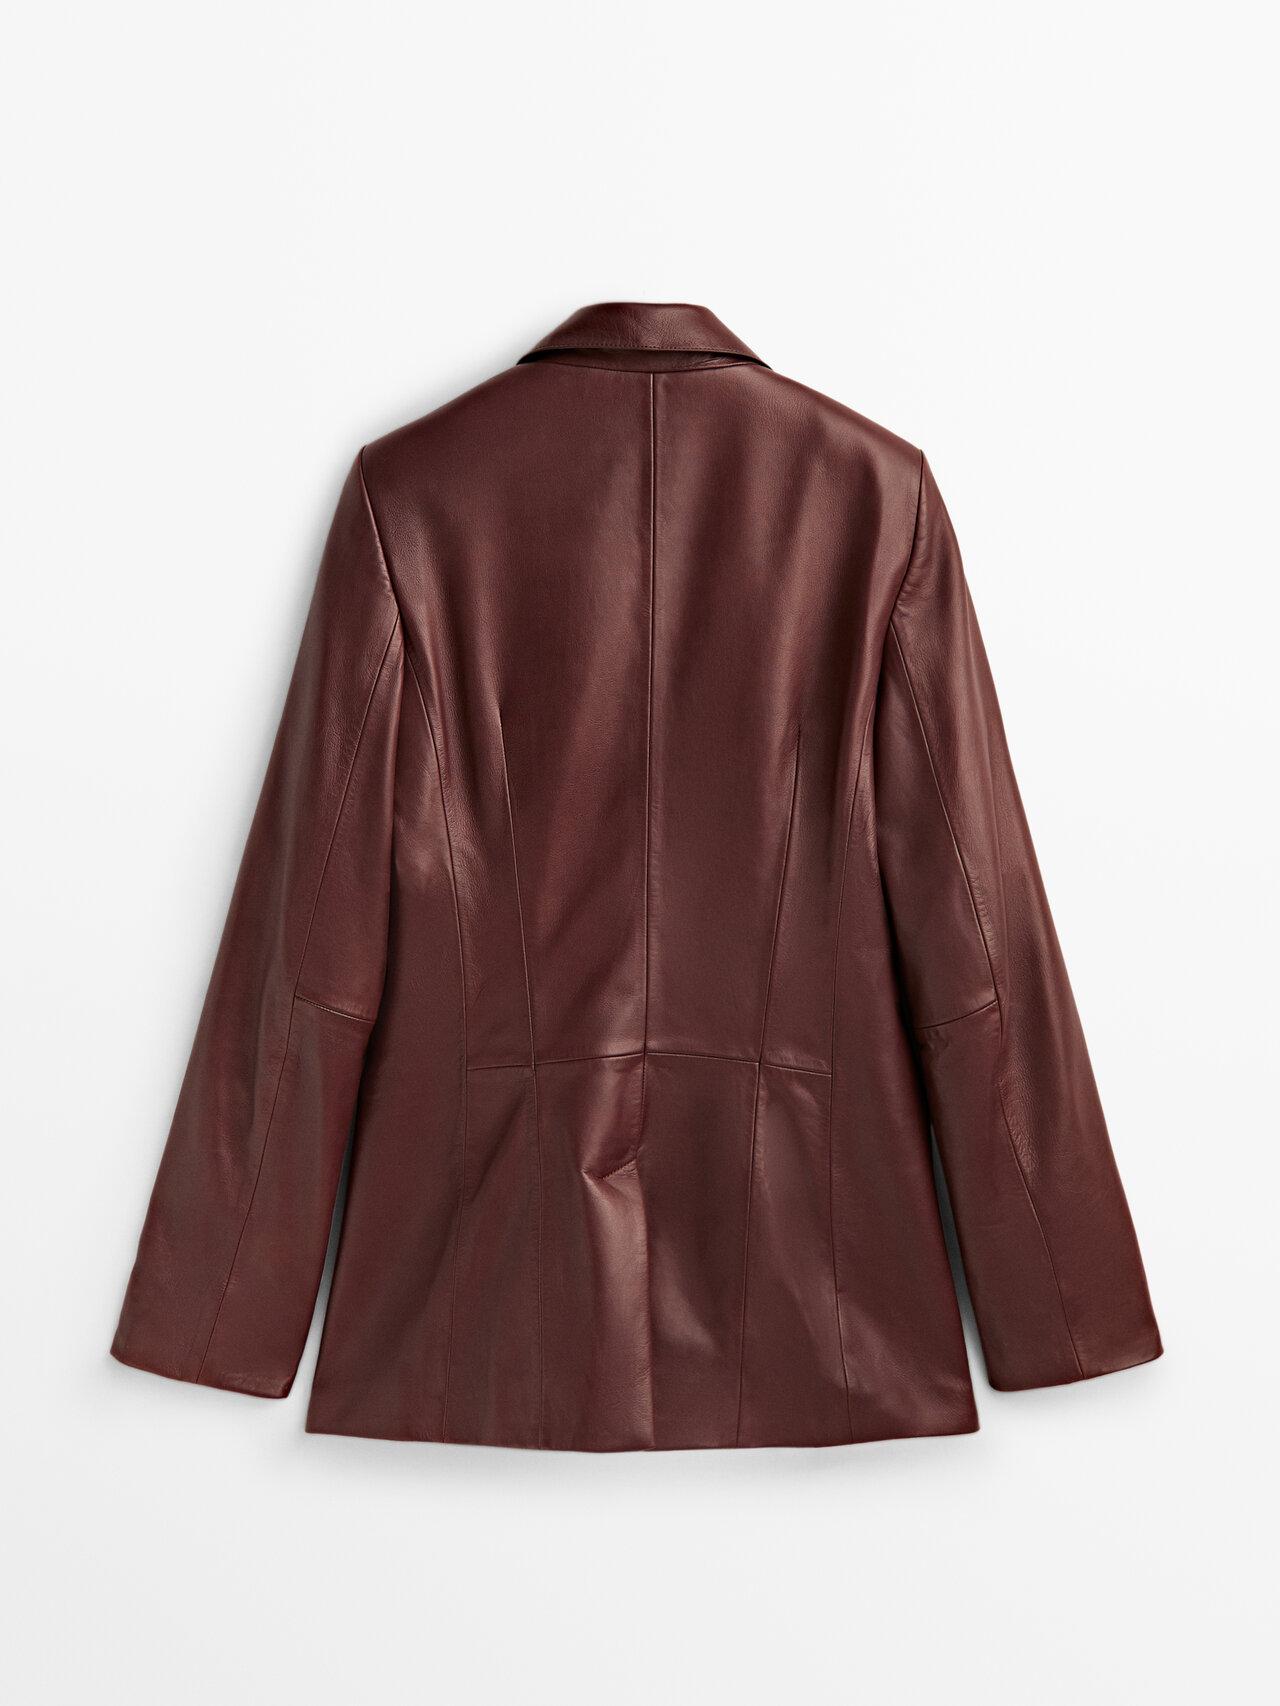 MASSIMO DUTTI Nappa Leather Blazer With Hidden Button in Red | Lyst